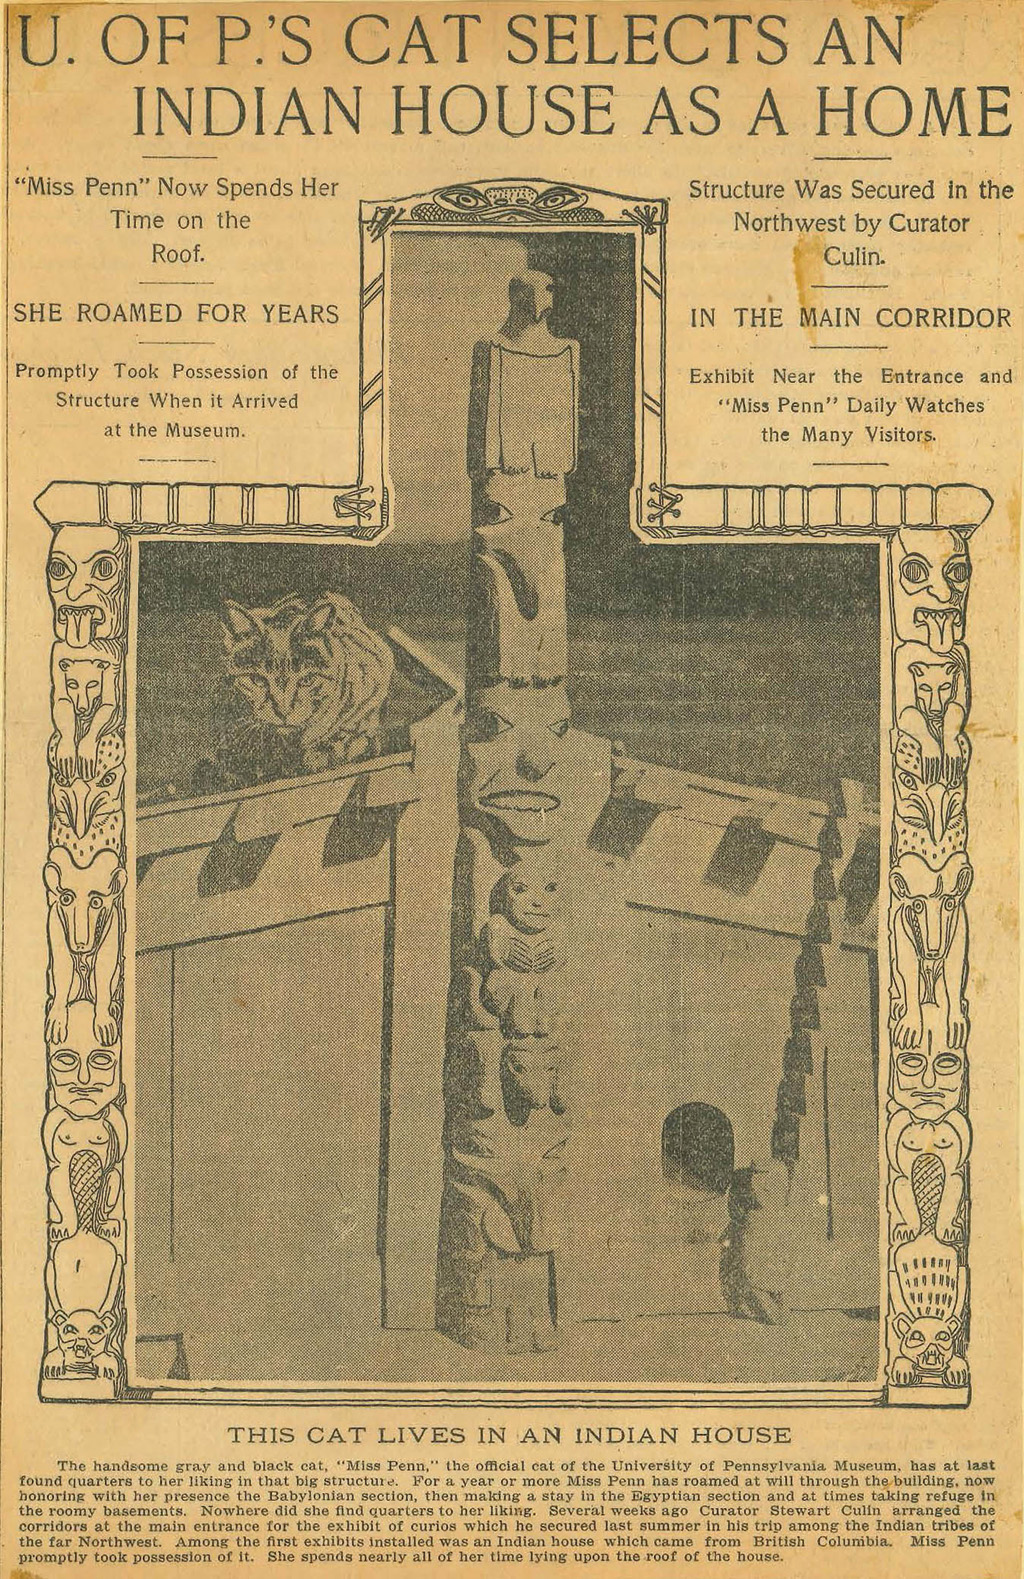 Scan of magazine page, showing a model of a house.